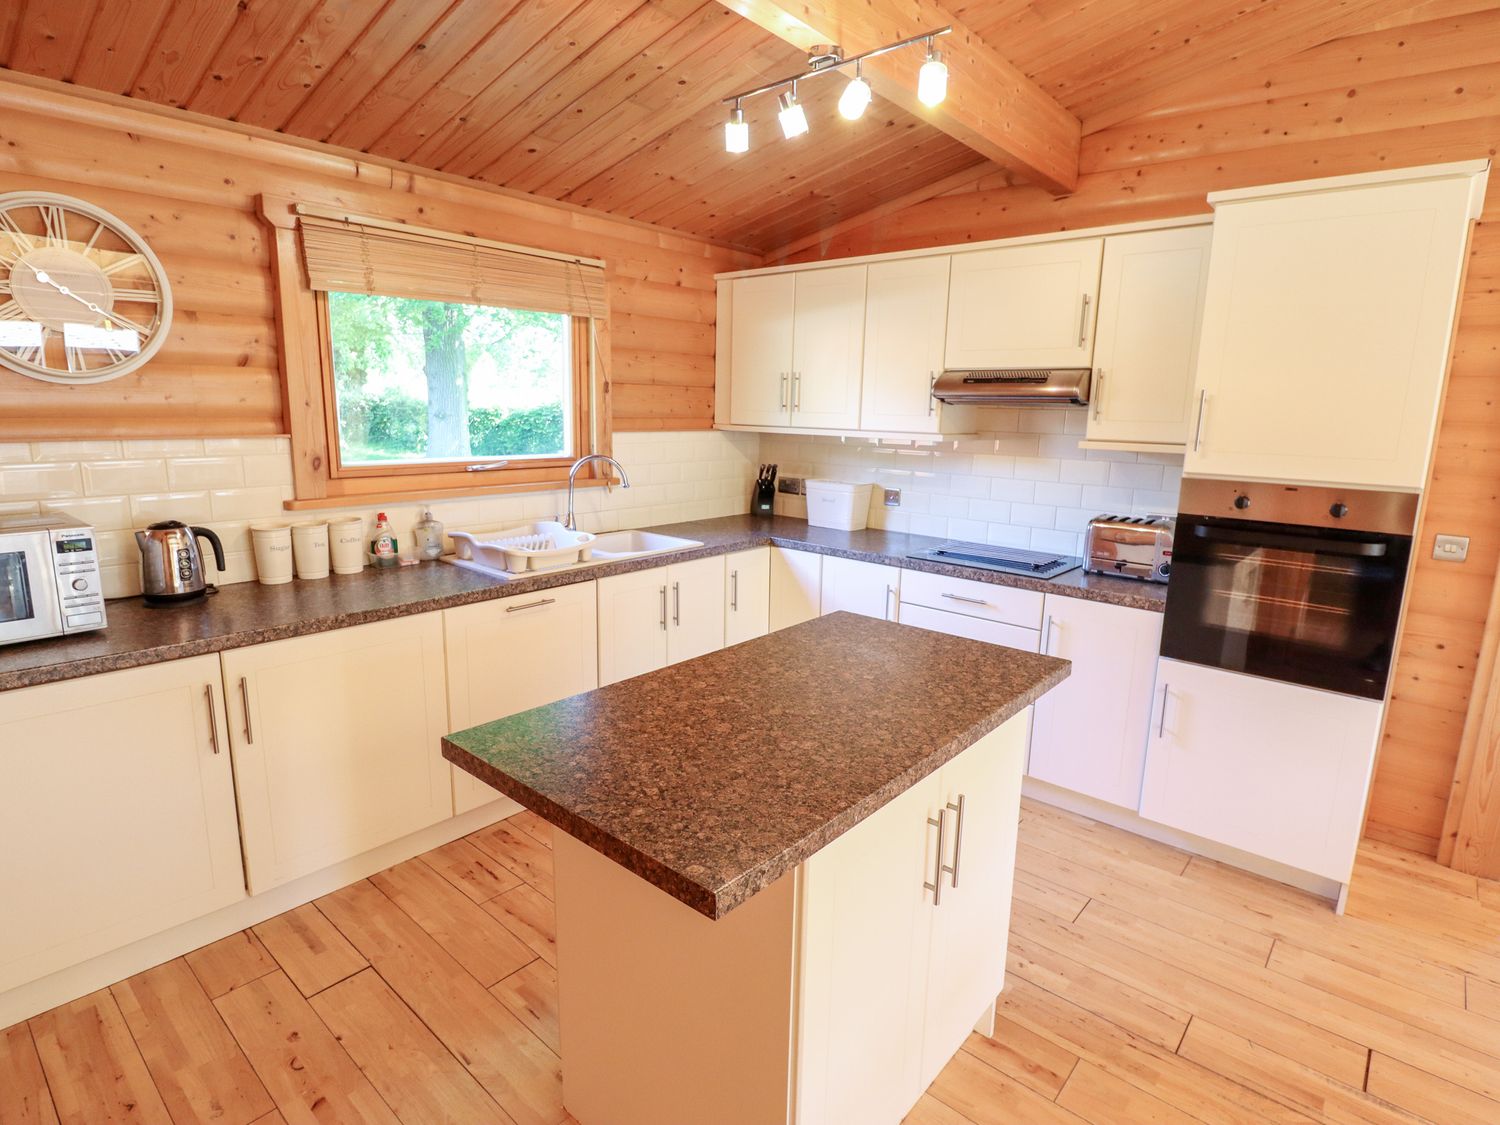 The Fairways is near Louth, in Lincolnshire. Four-bedroom lodge enjoying countryside views, in AONB.